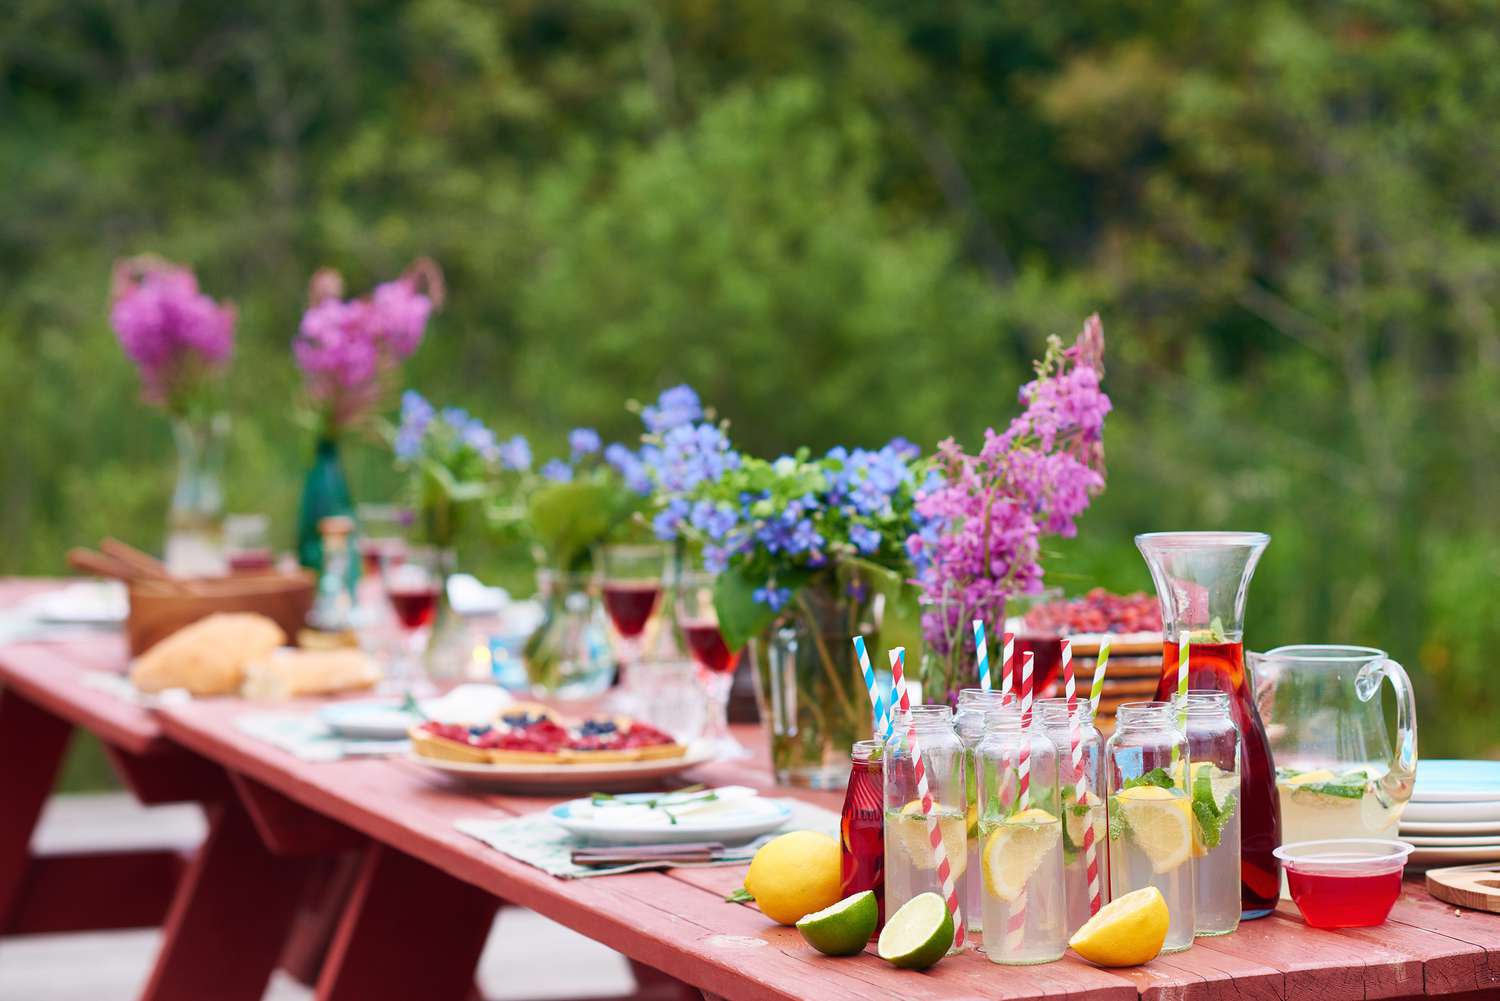 How To Keep An Outdoor Party Cool